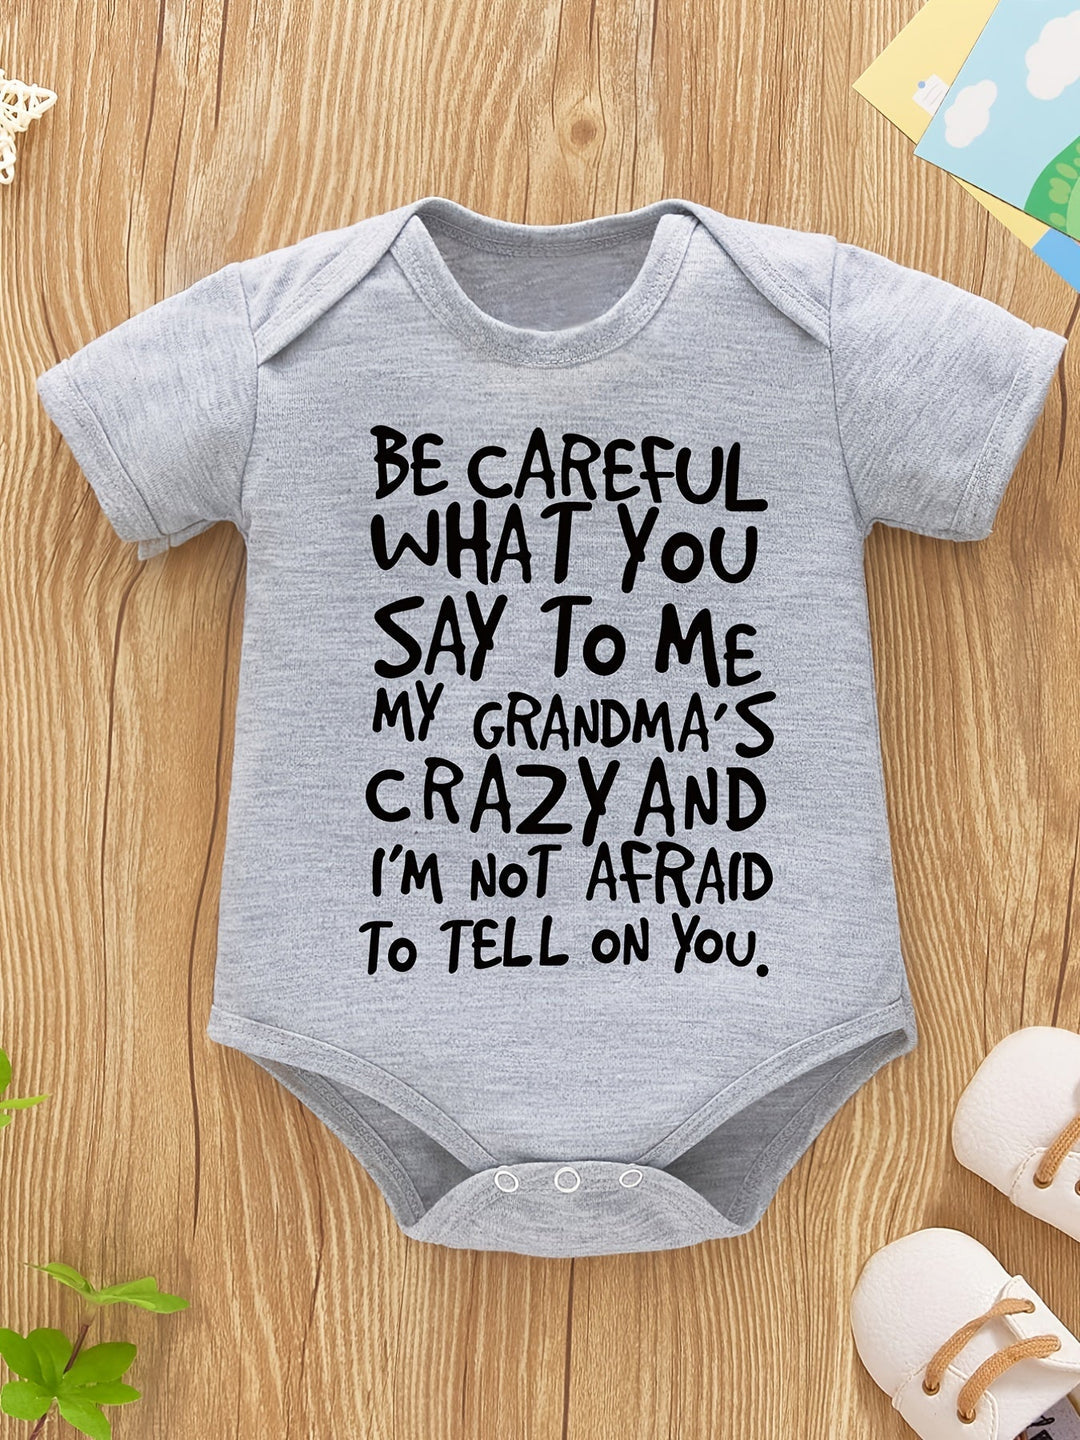 Newborn Babies Watch Out I Have Crazy Grandma Print Short Sleeve Onesies Rompers - Gen U Us Products